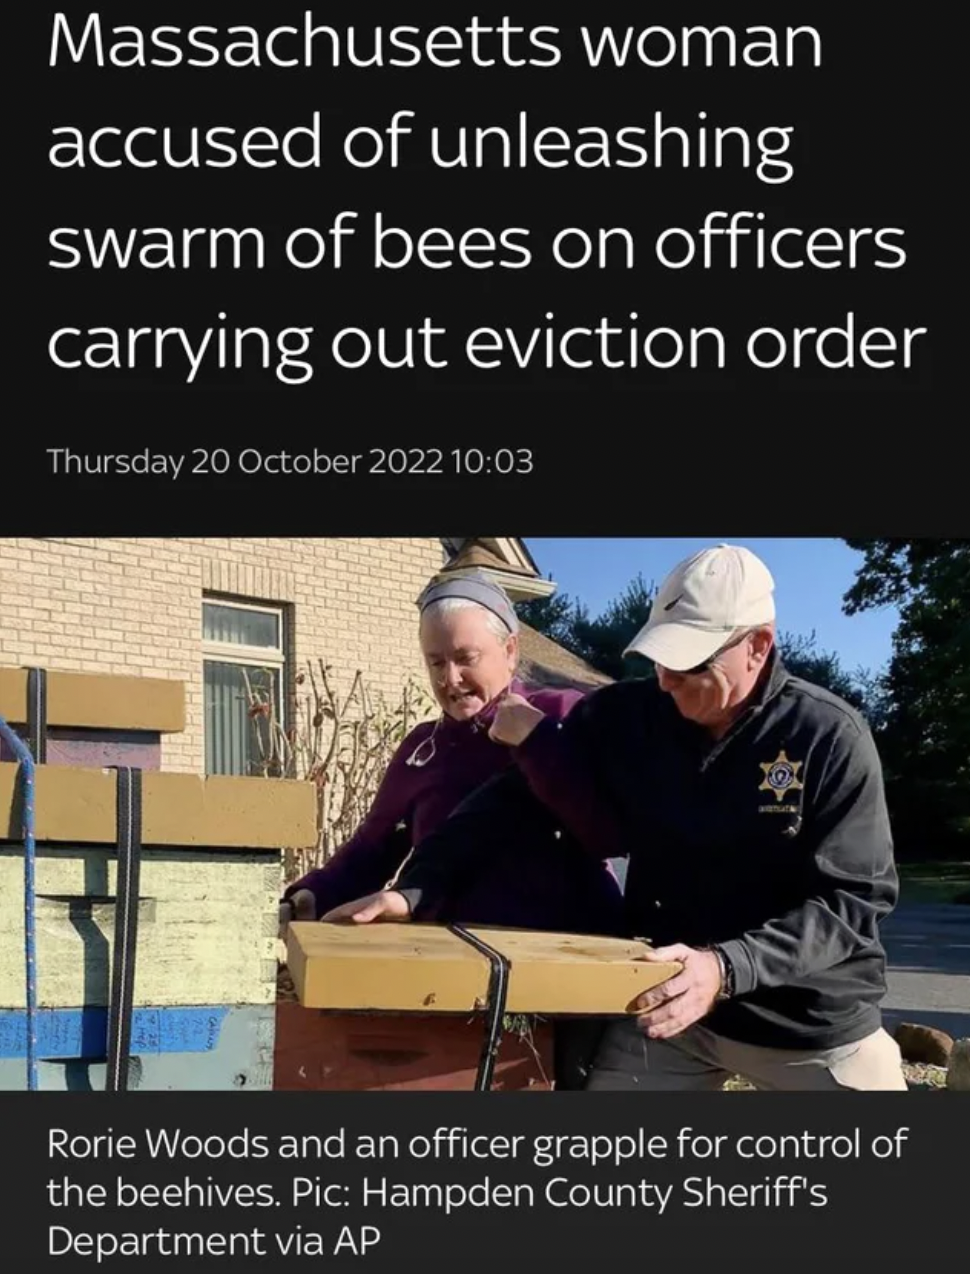 Funny Facepalms and Fails - Bees - Massachusetts woman accused of unleashing swarm of bees on officers carrying out eviction order Thursday Rorie Woods and an officer grapple for control of the beehives. Pic Hampden County Sheriff's Department via Ap